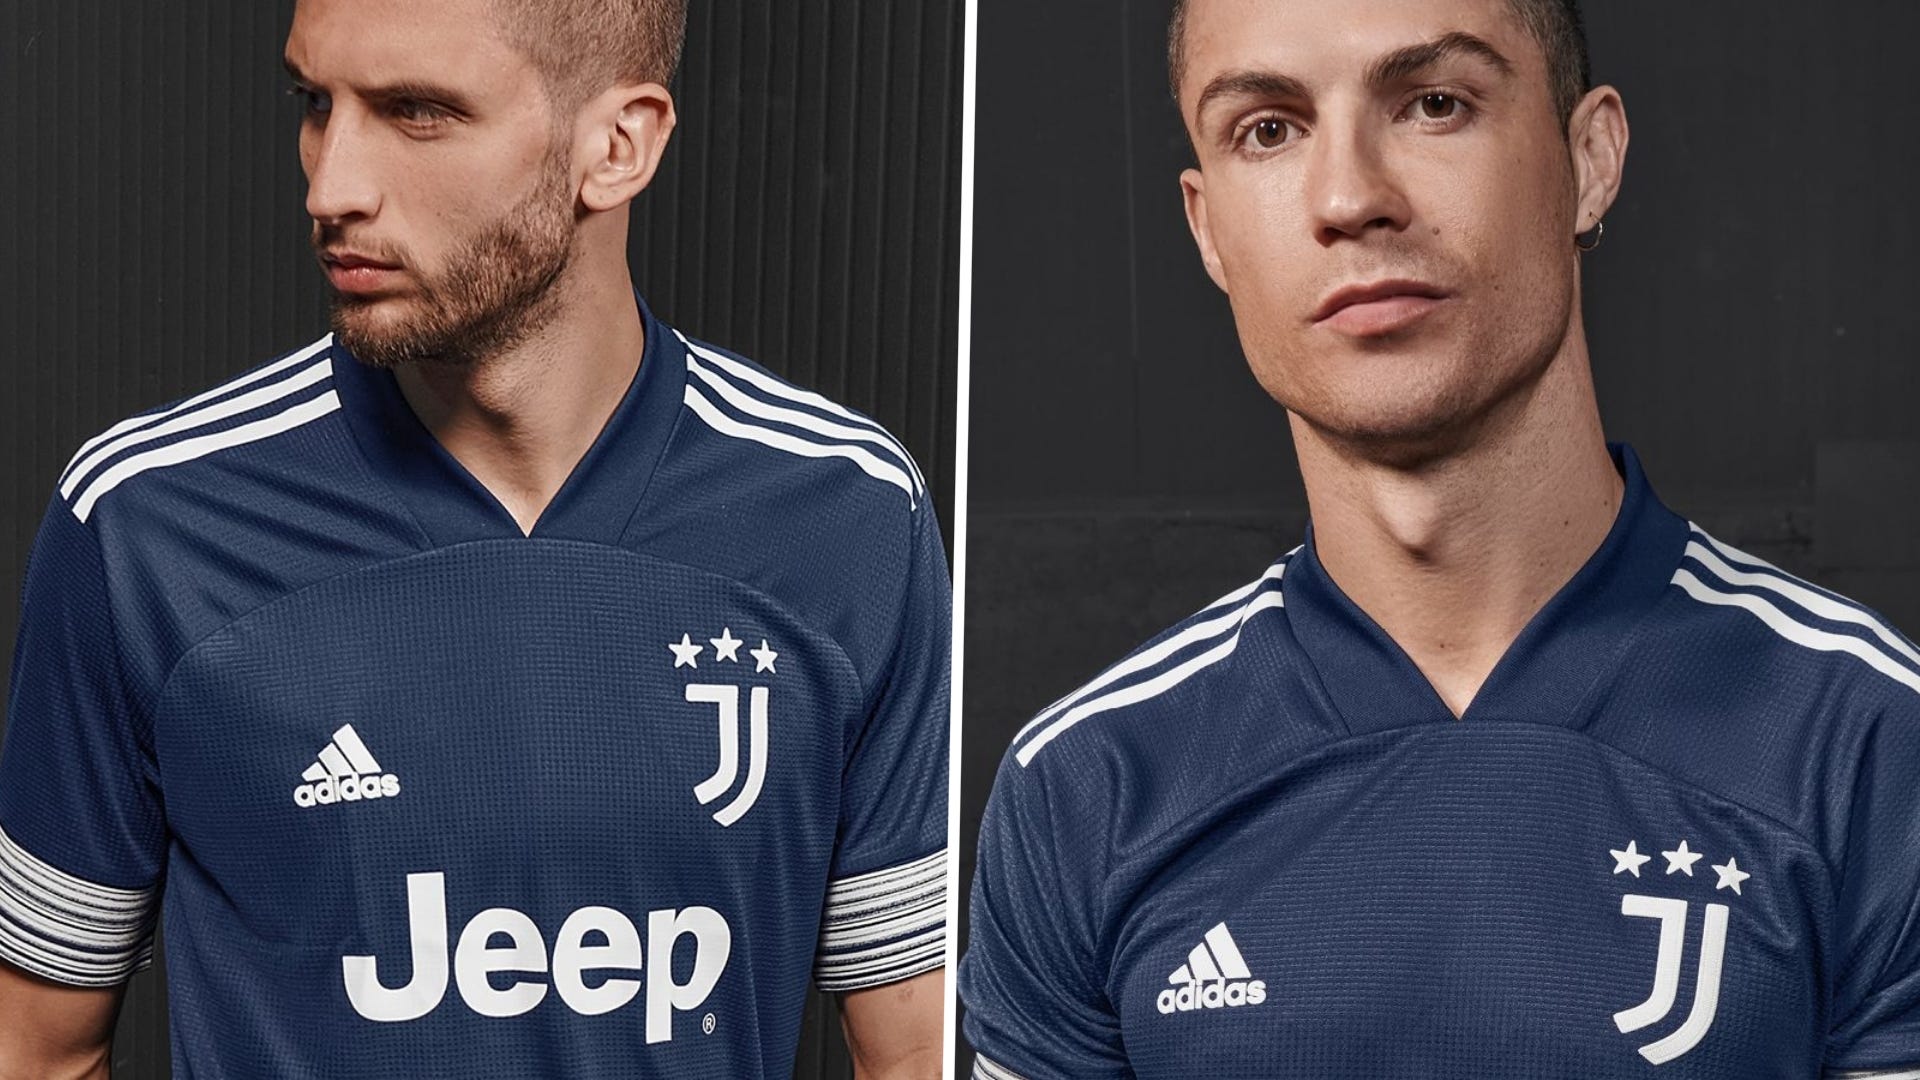 New Tottenham kits 2020-21: Spurs unveil home and away designs for